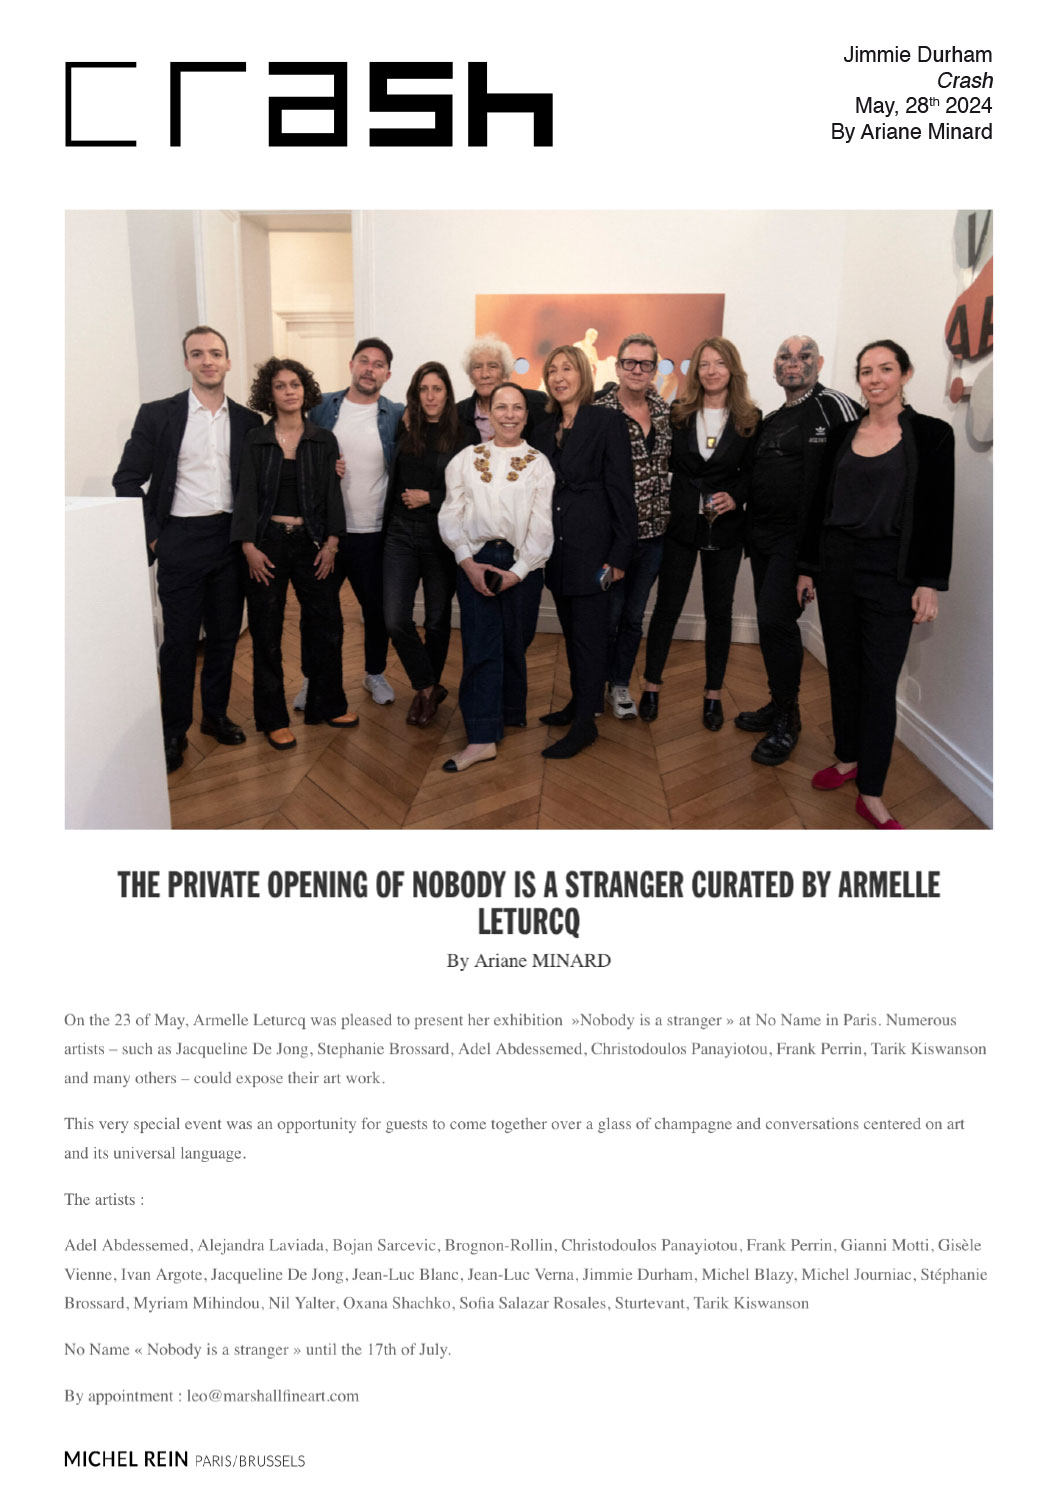 The private opening of 